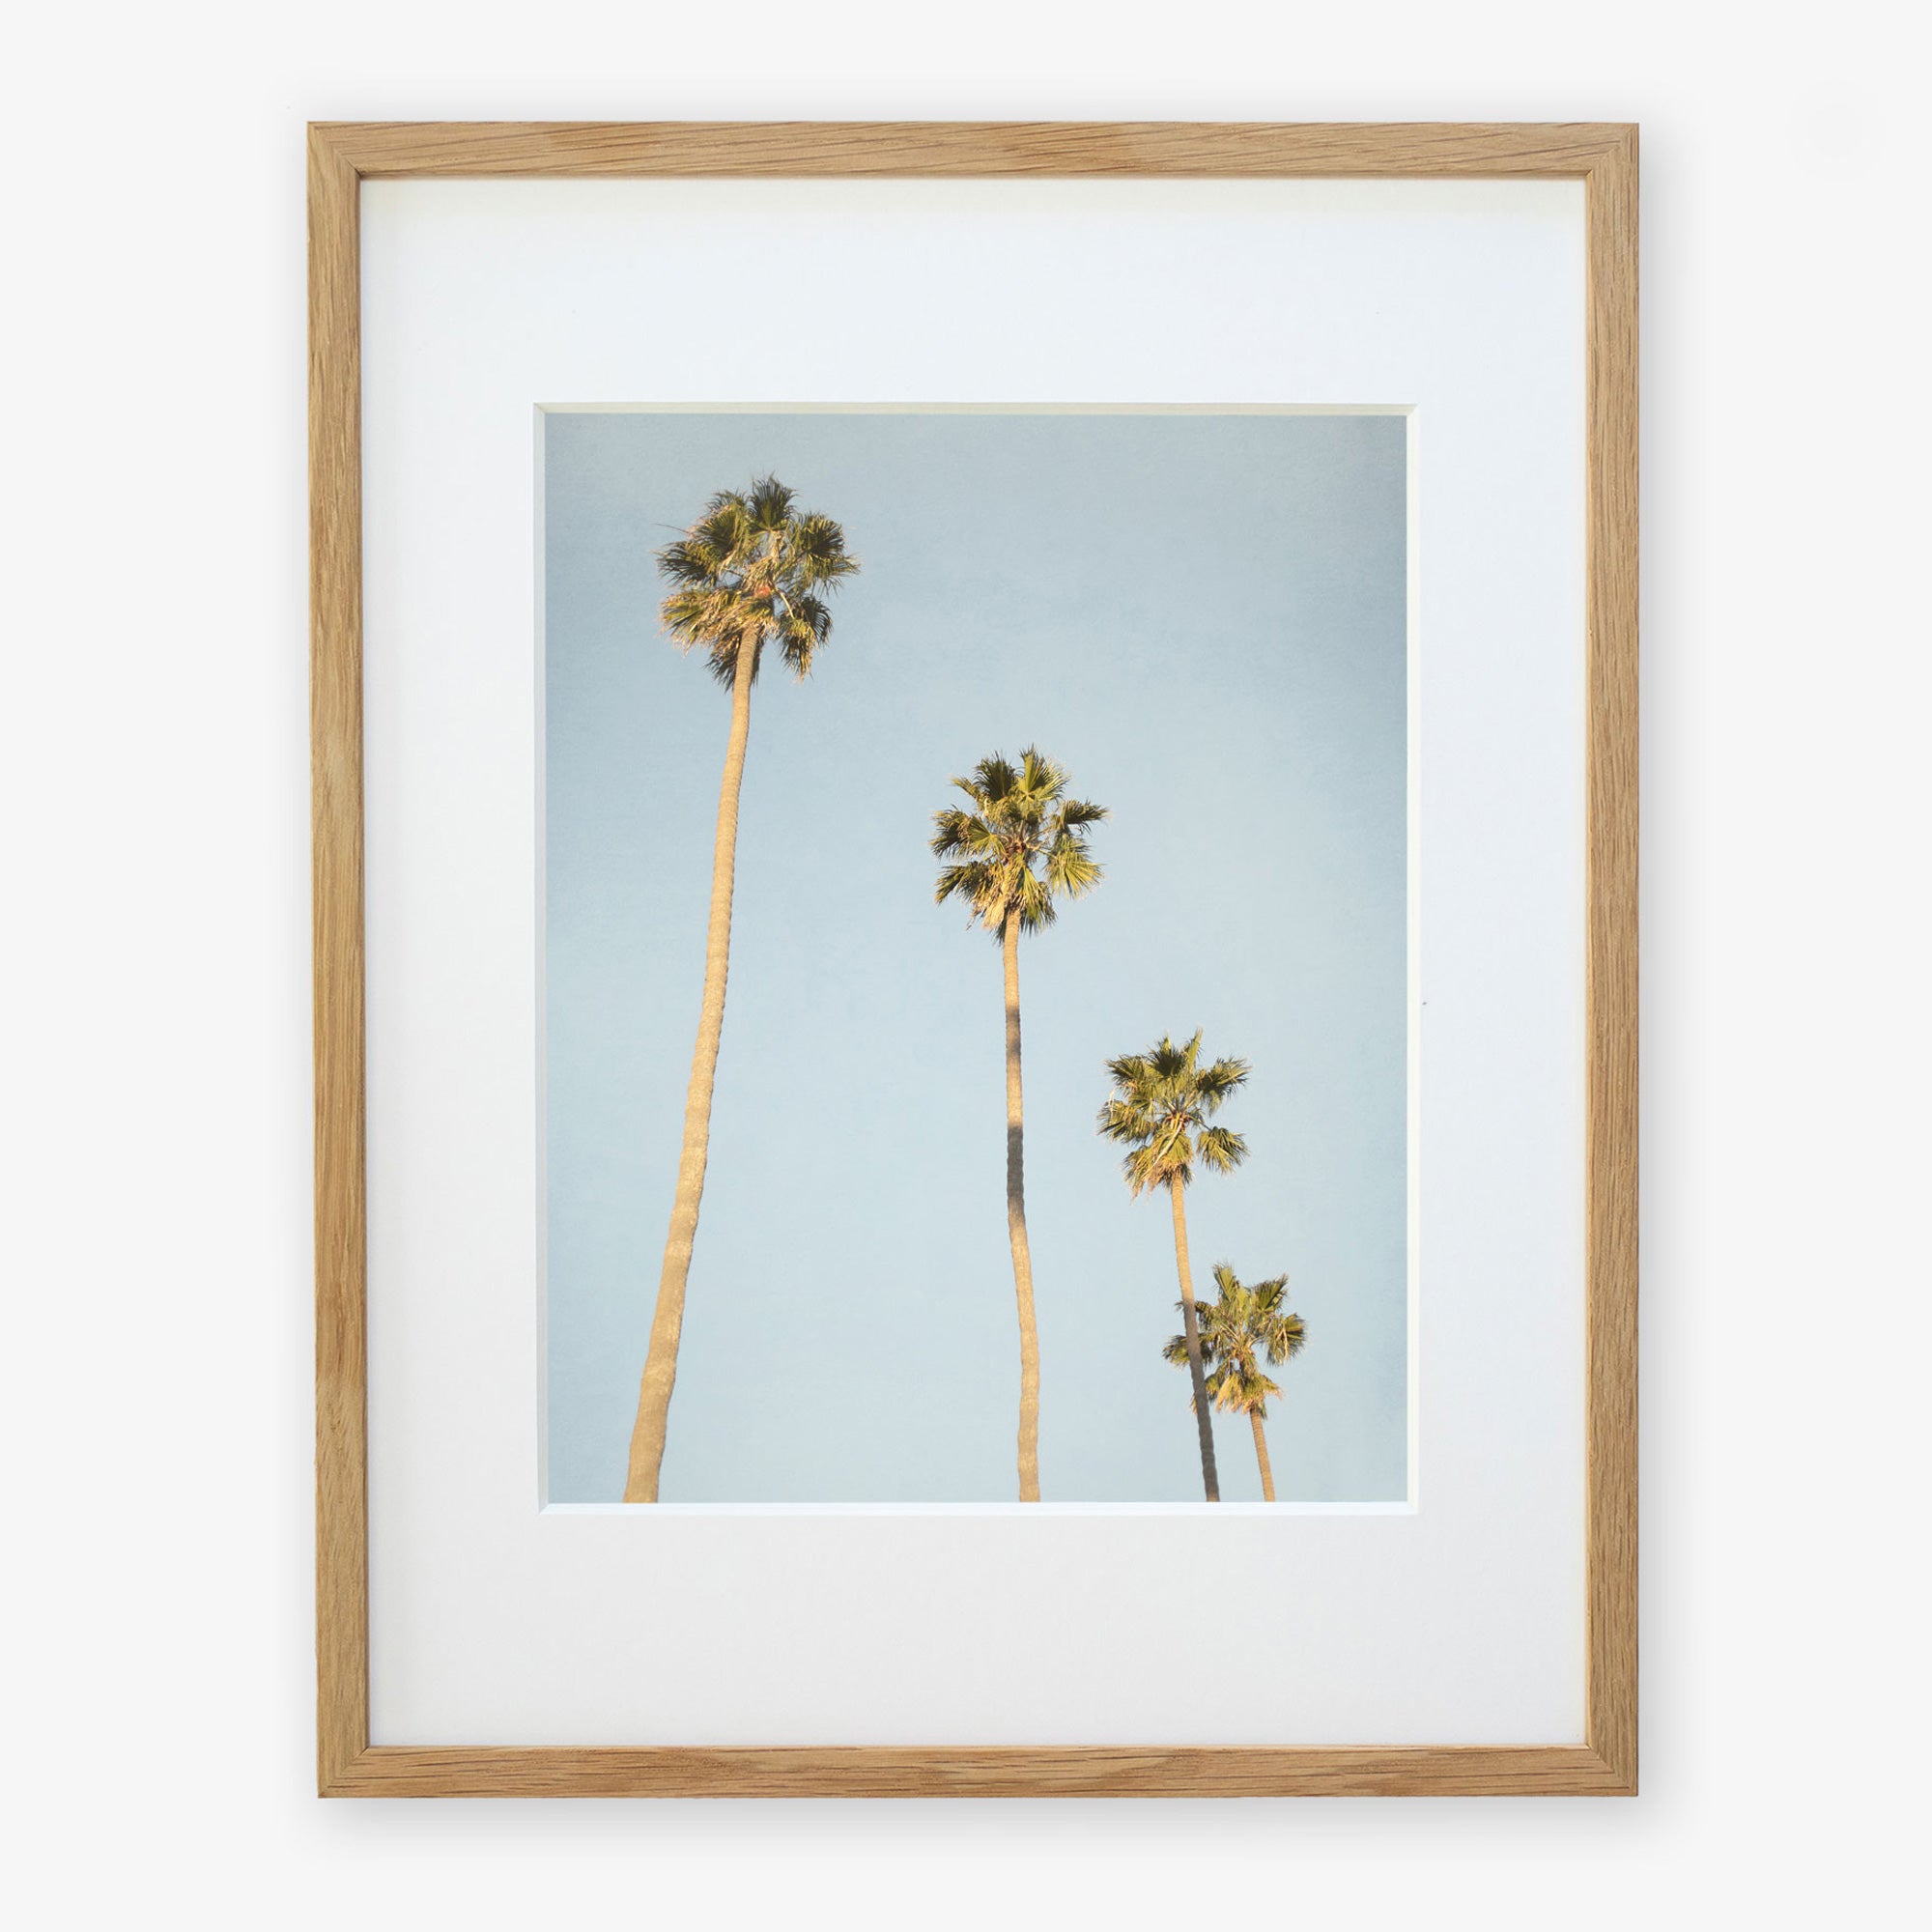 Offley Green's Los Angeles Palm Tree Photographic Print 'Palm Stairs to Heaven'